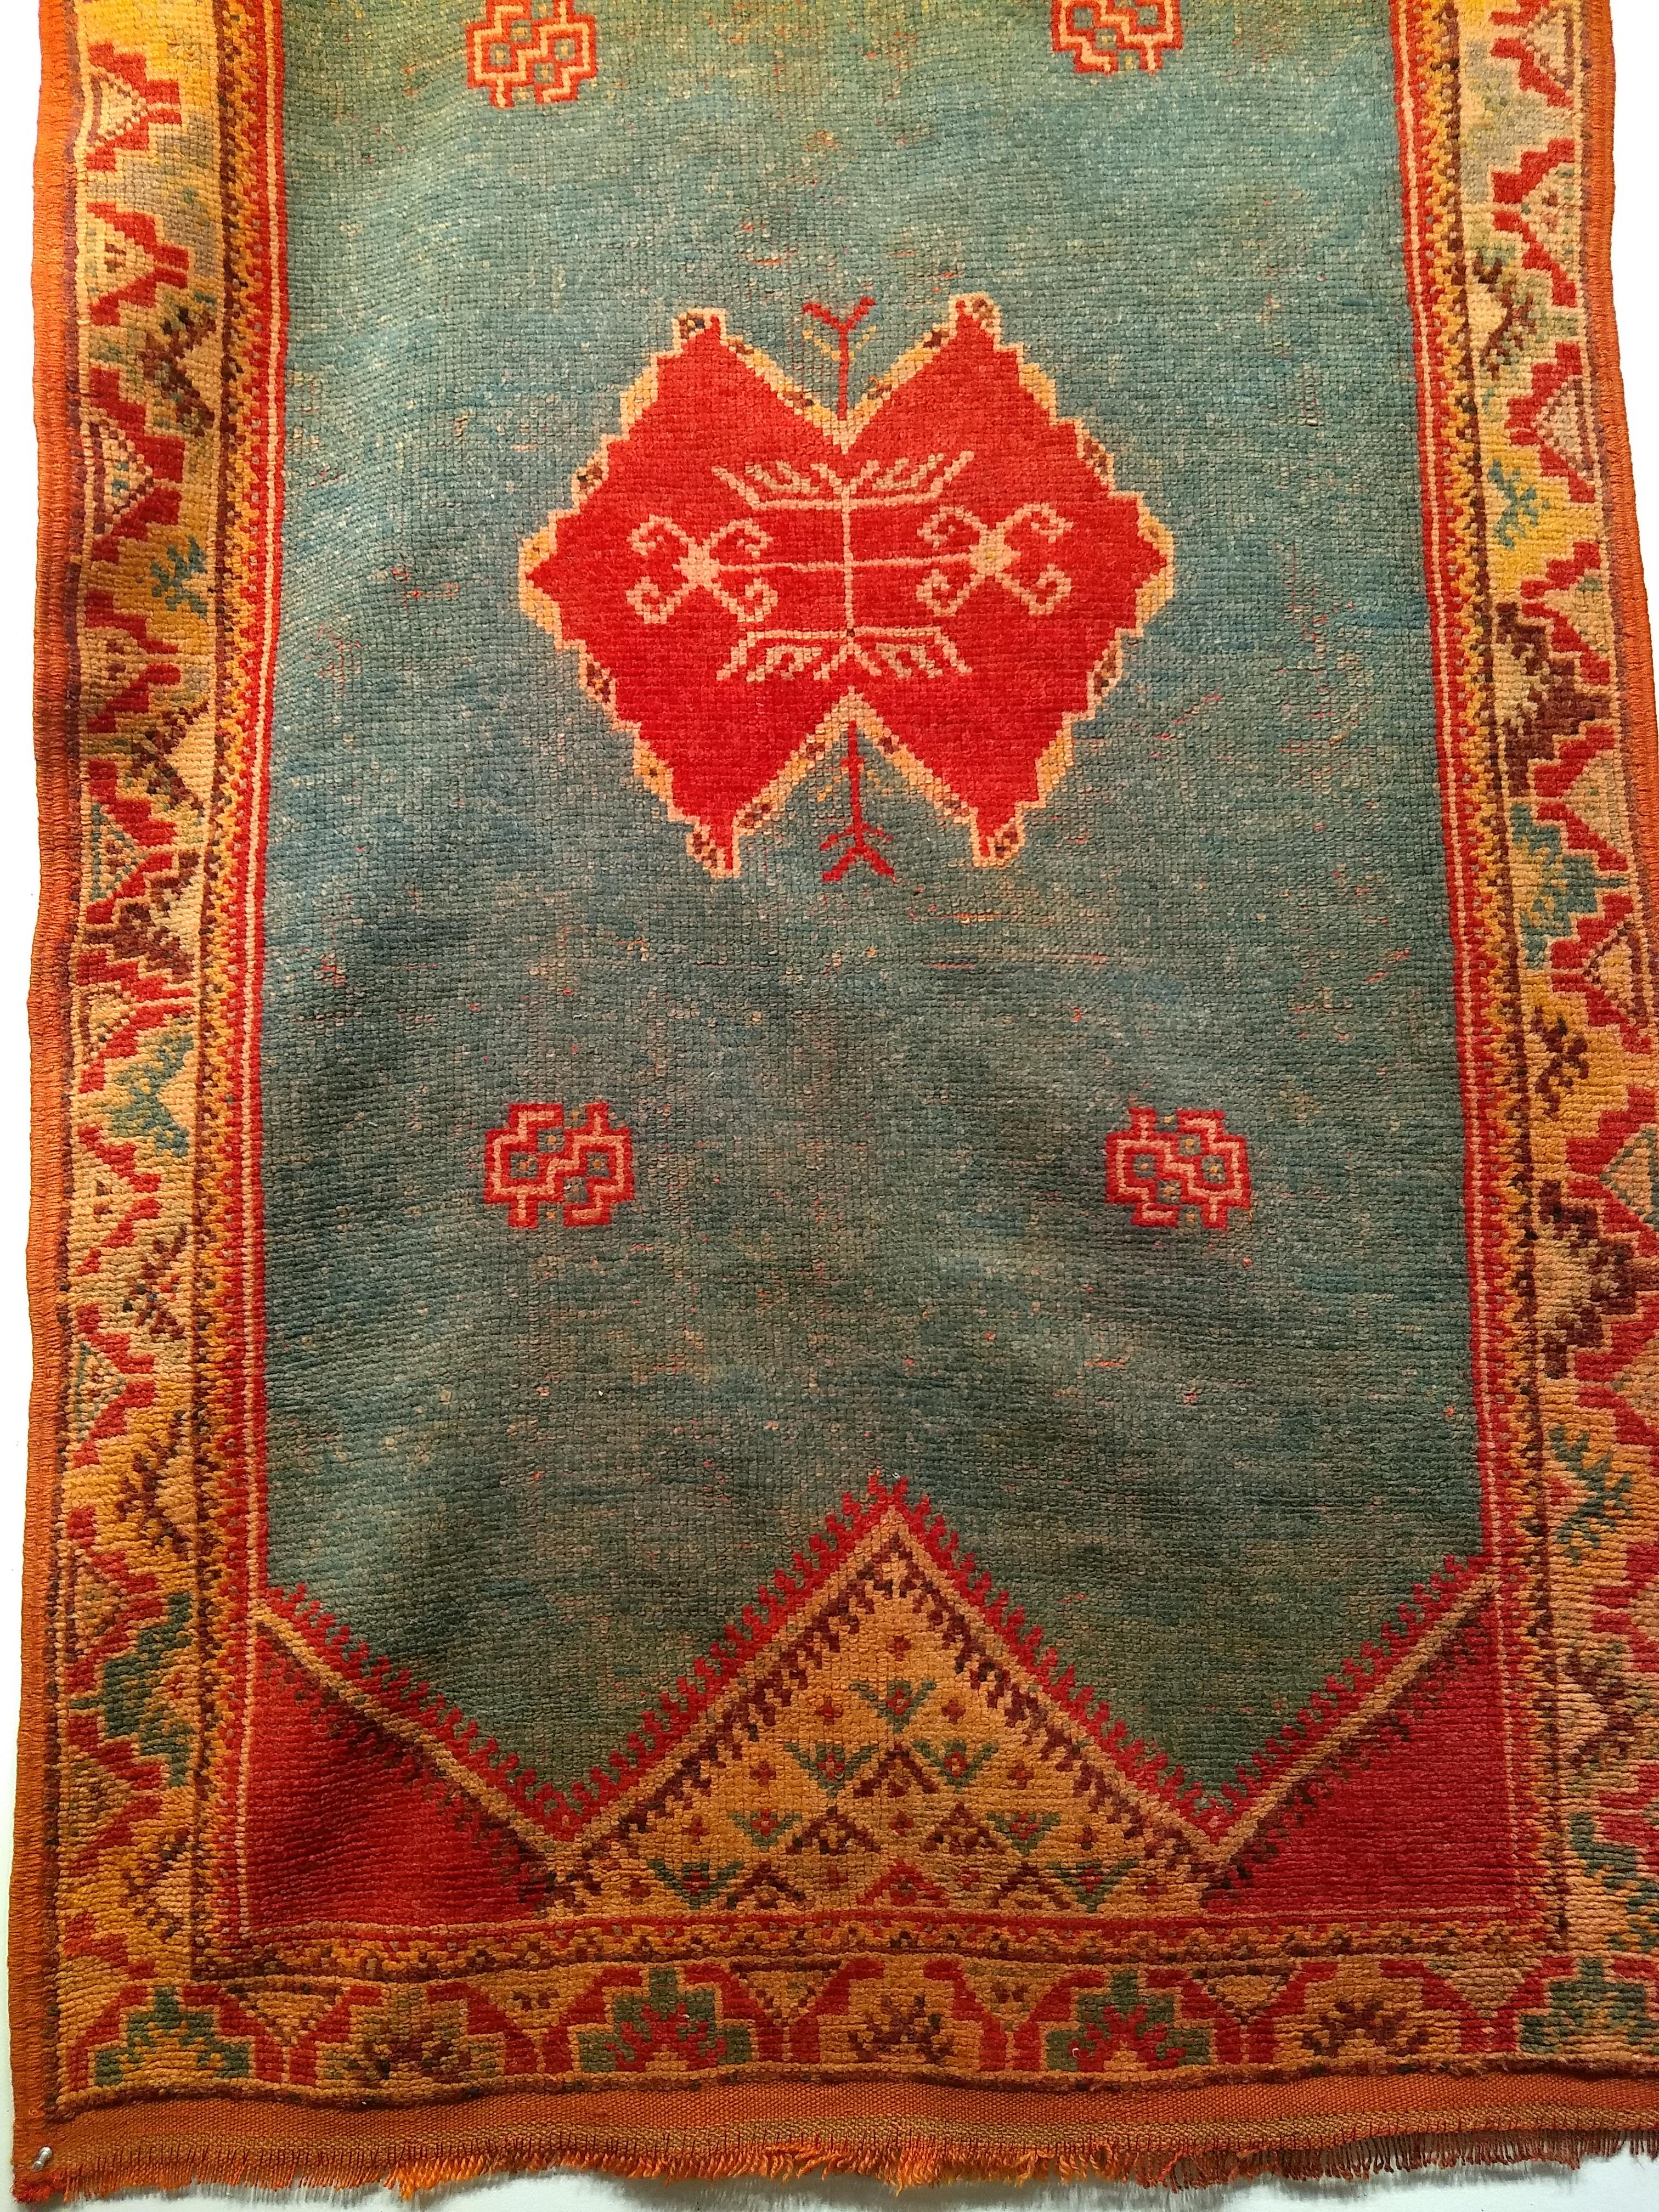 Wool Vintage Moroccan Area Rug in Geometric Pattern in Pale Green, yellow, Red, Brown For Sale